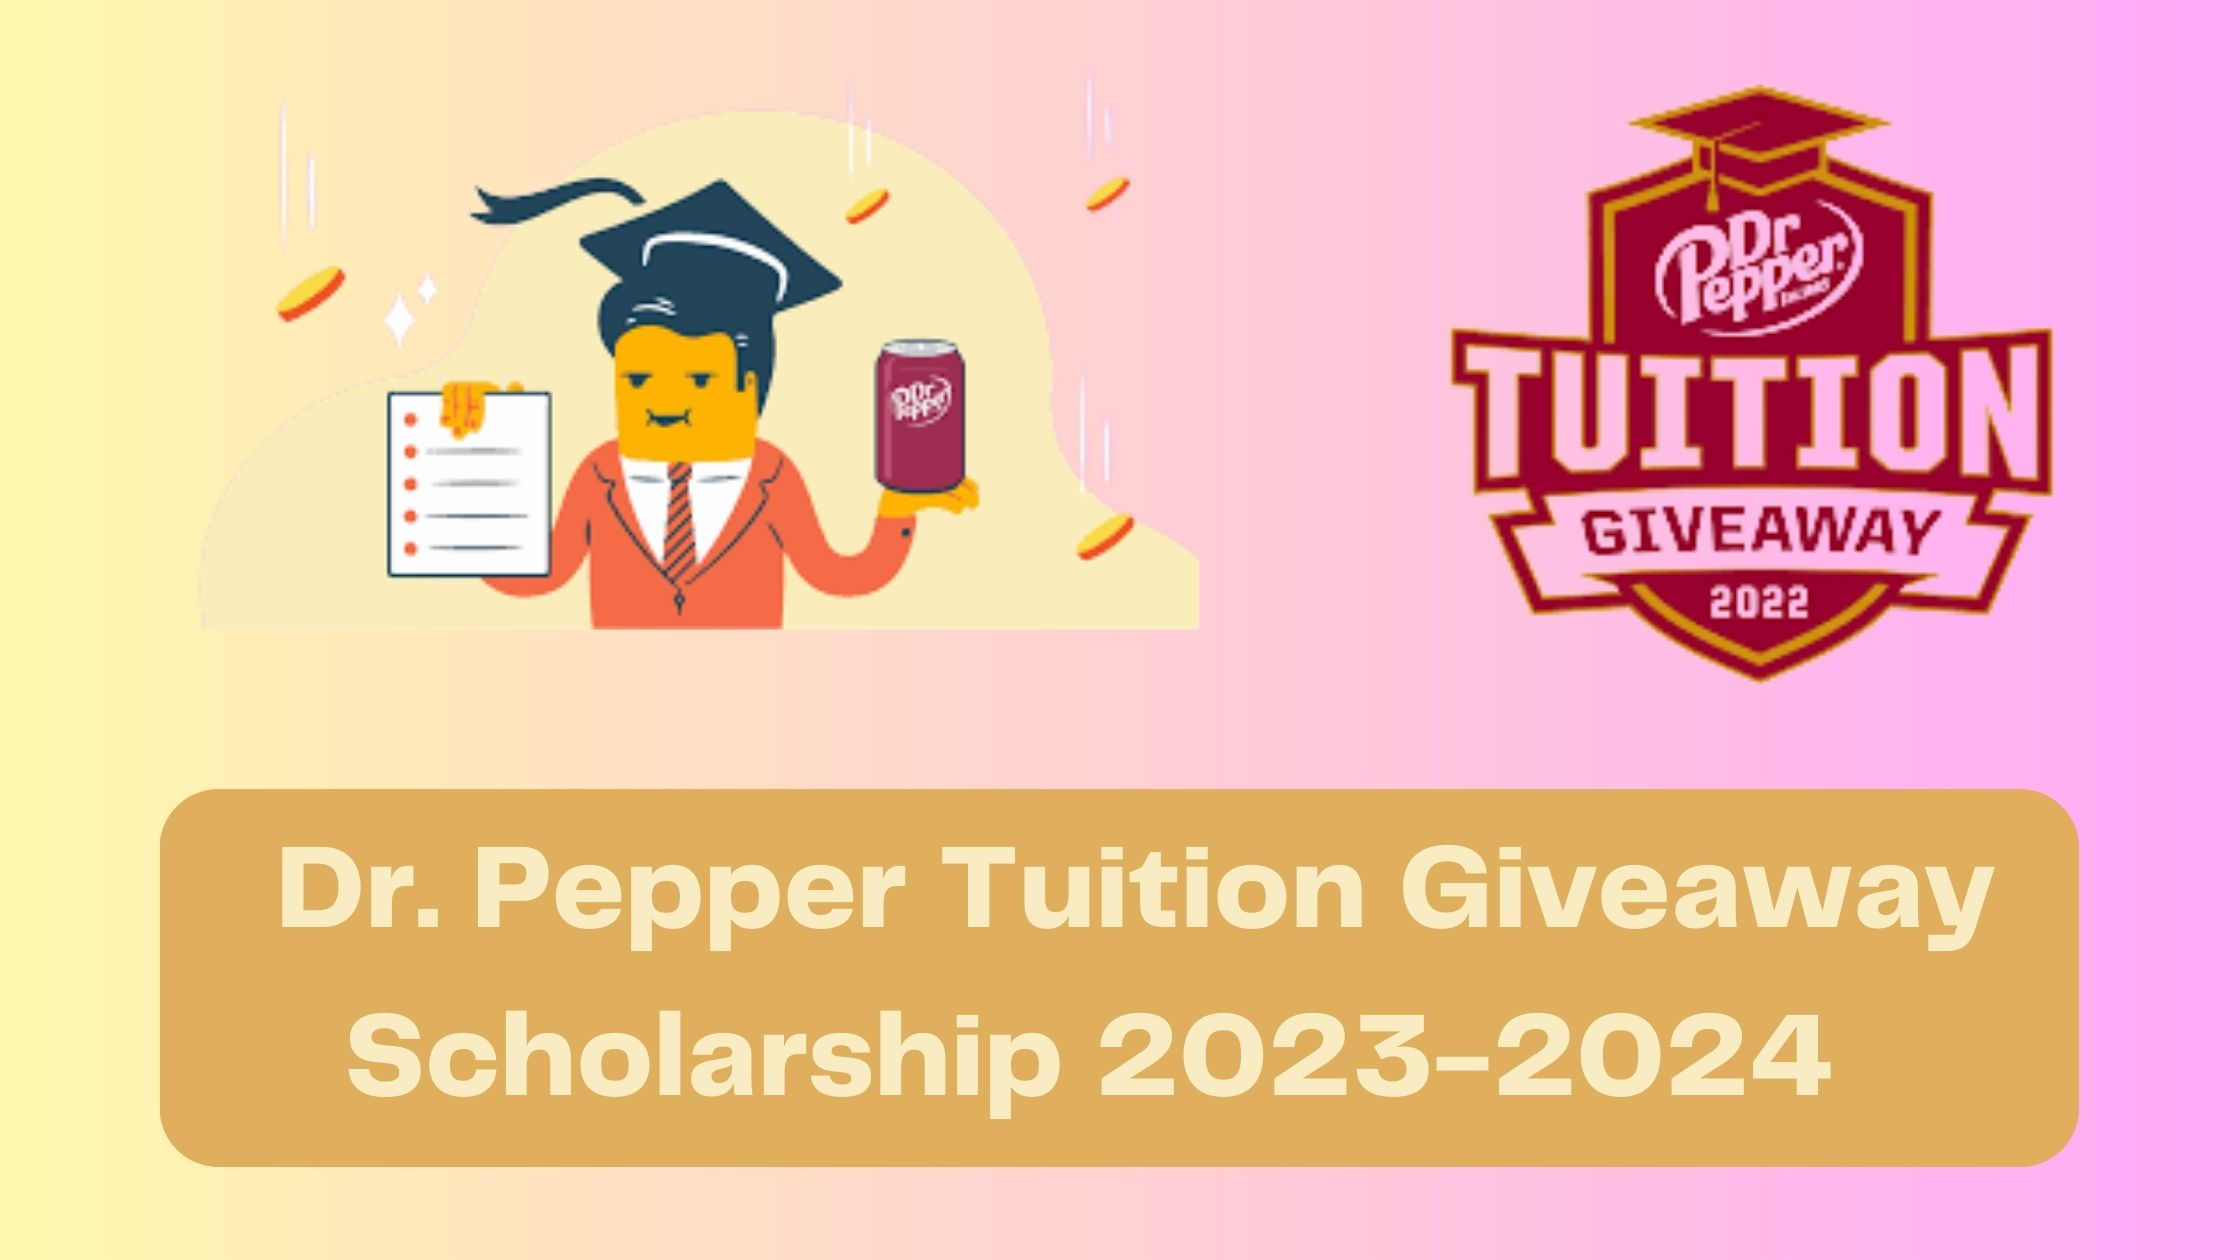 Dr. Pepper Tuition Giveaway Scholarship 2023-2024